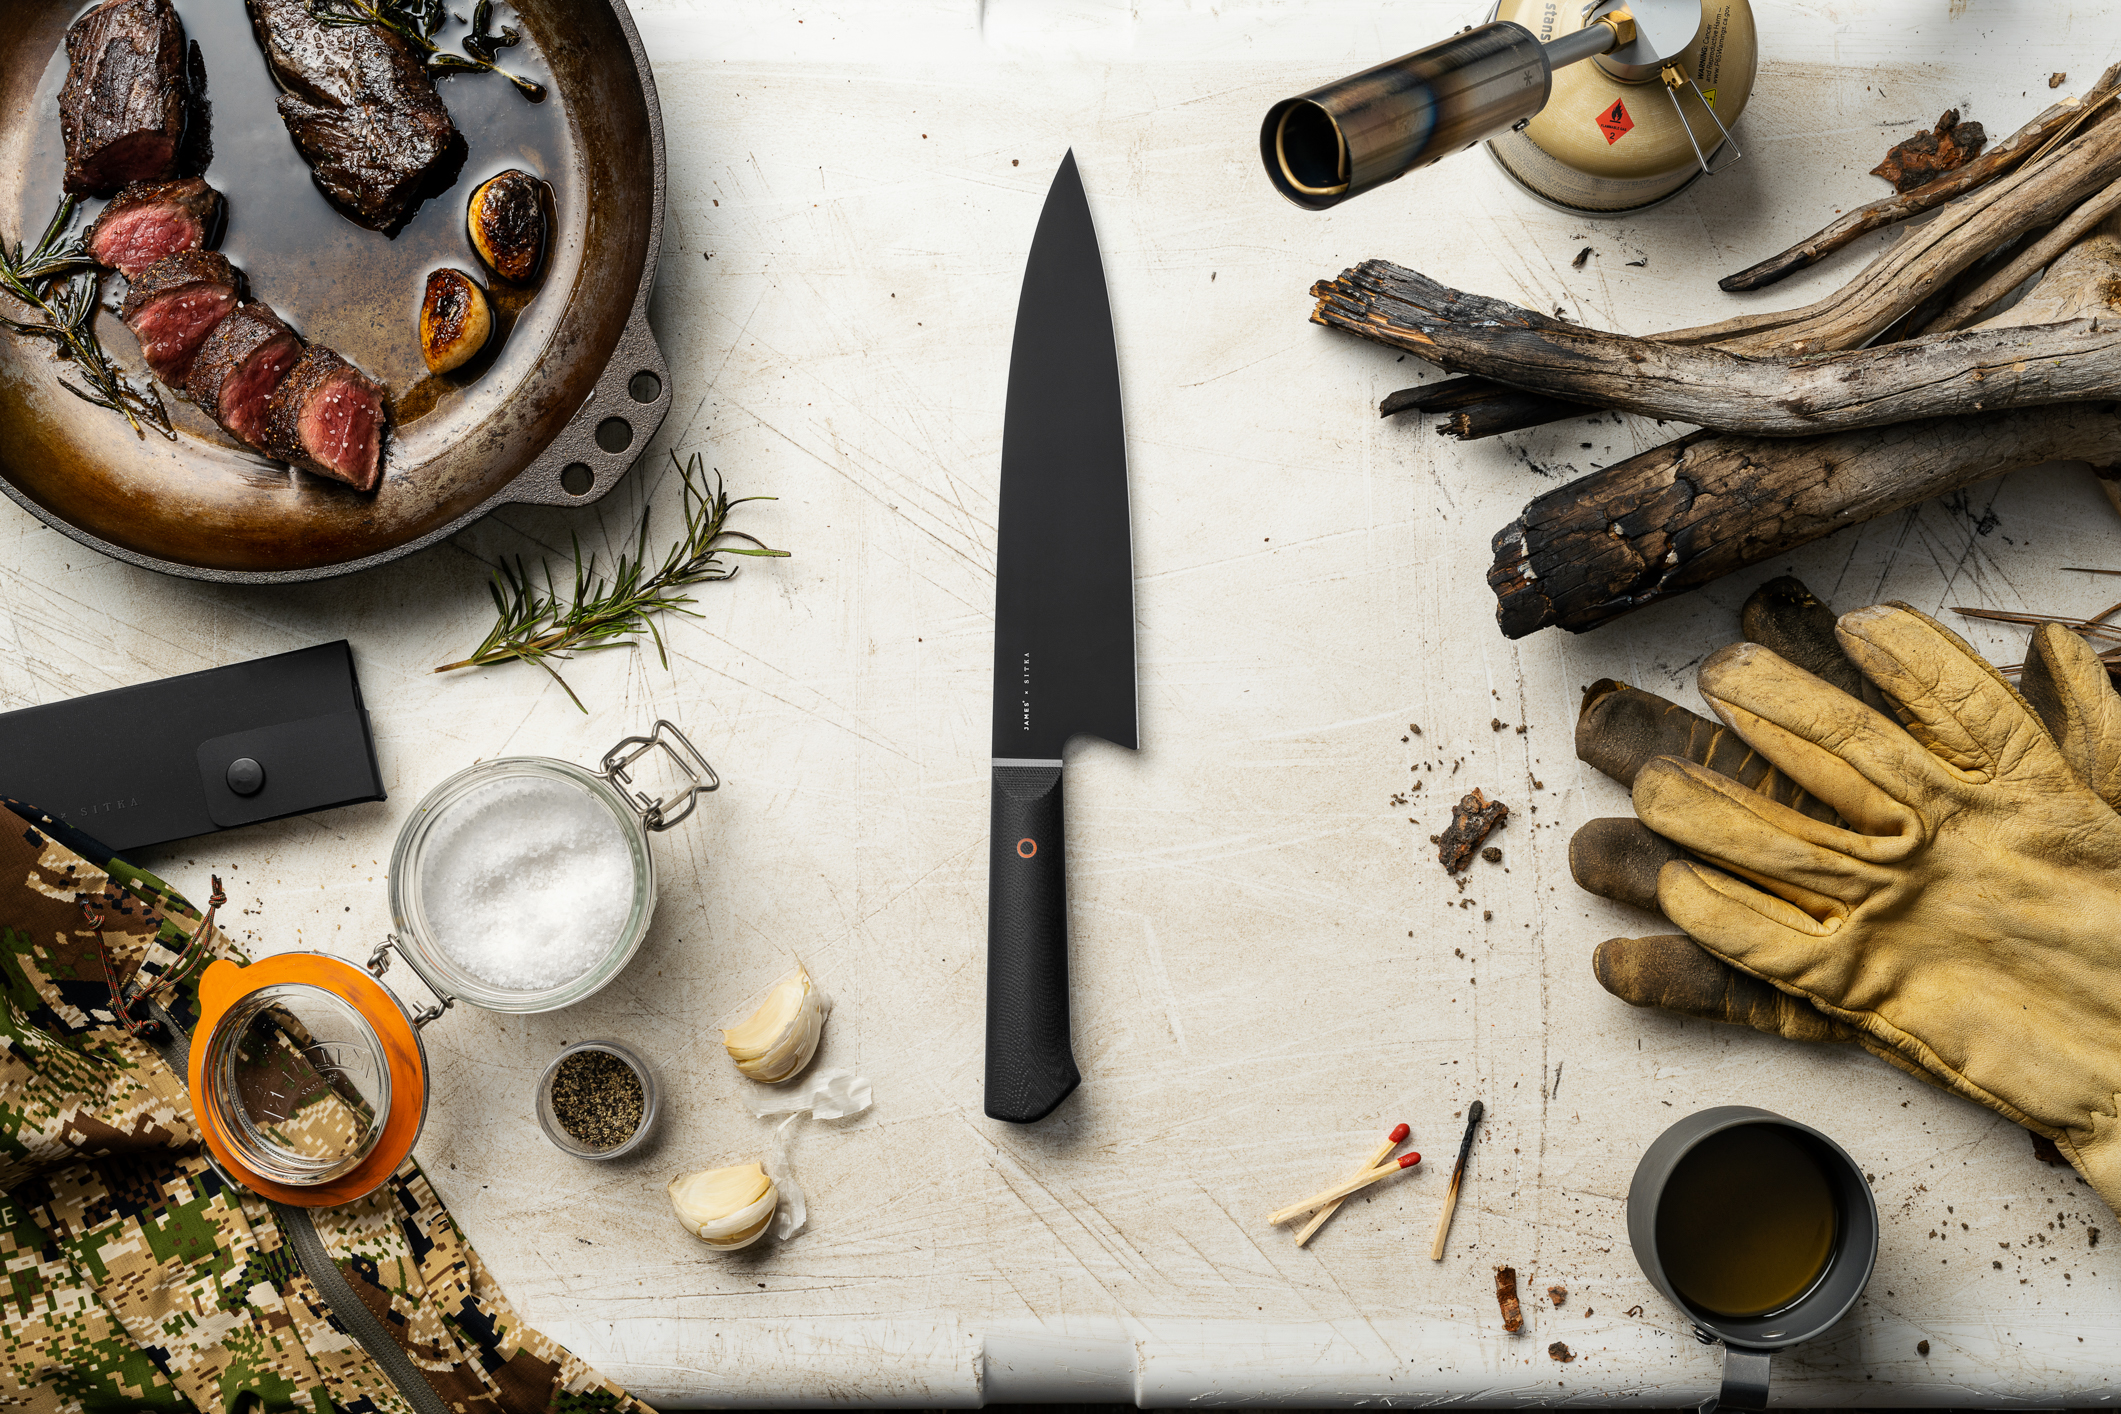 Camp Knife Kit Review: Better Blades for Chefs on the Go